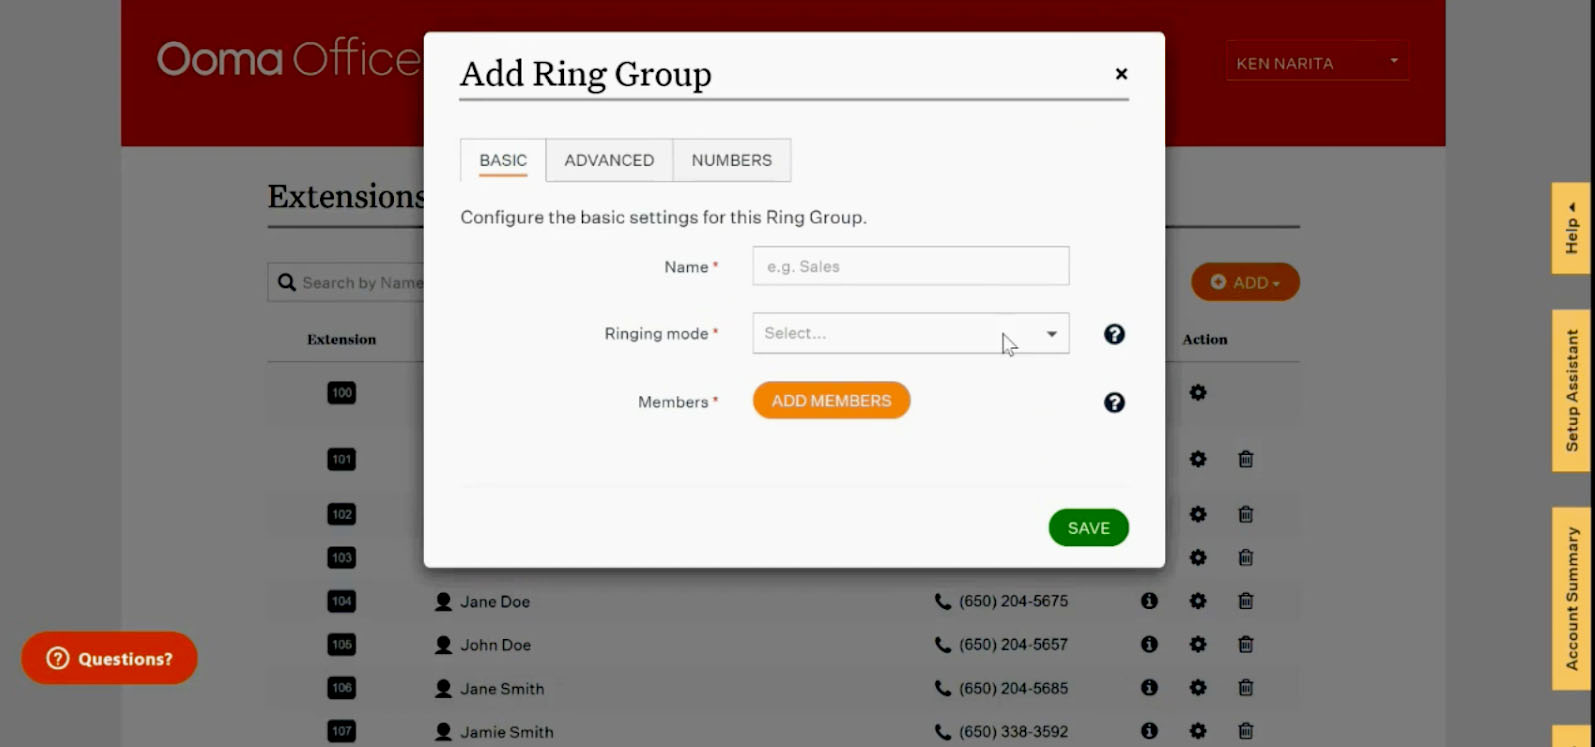 Ooma Office interface showing a dialog box titled "Add Ring Group" with configurations for ring group name, ringing mode, and list of members.